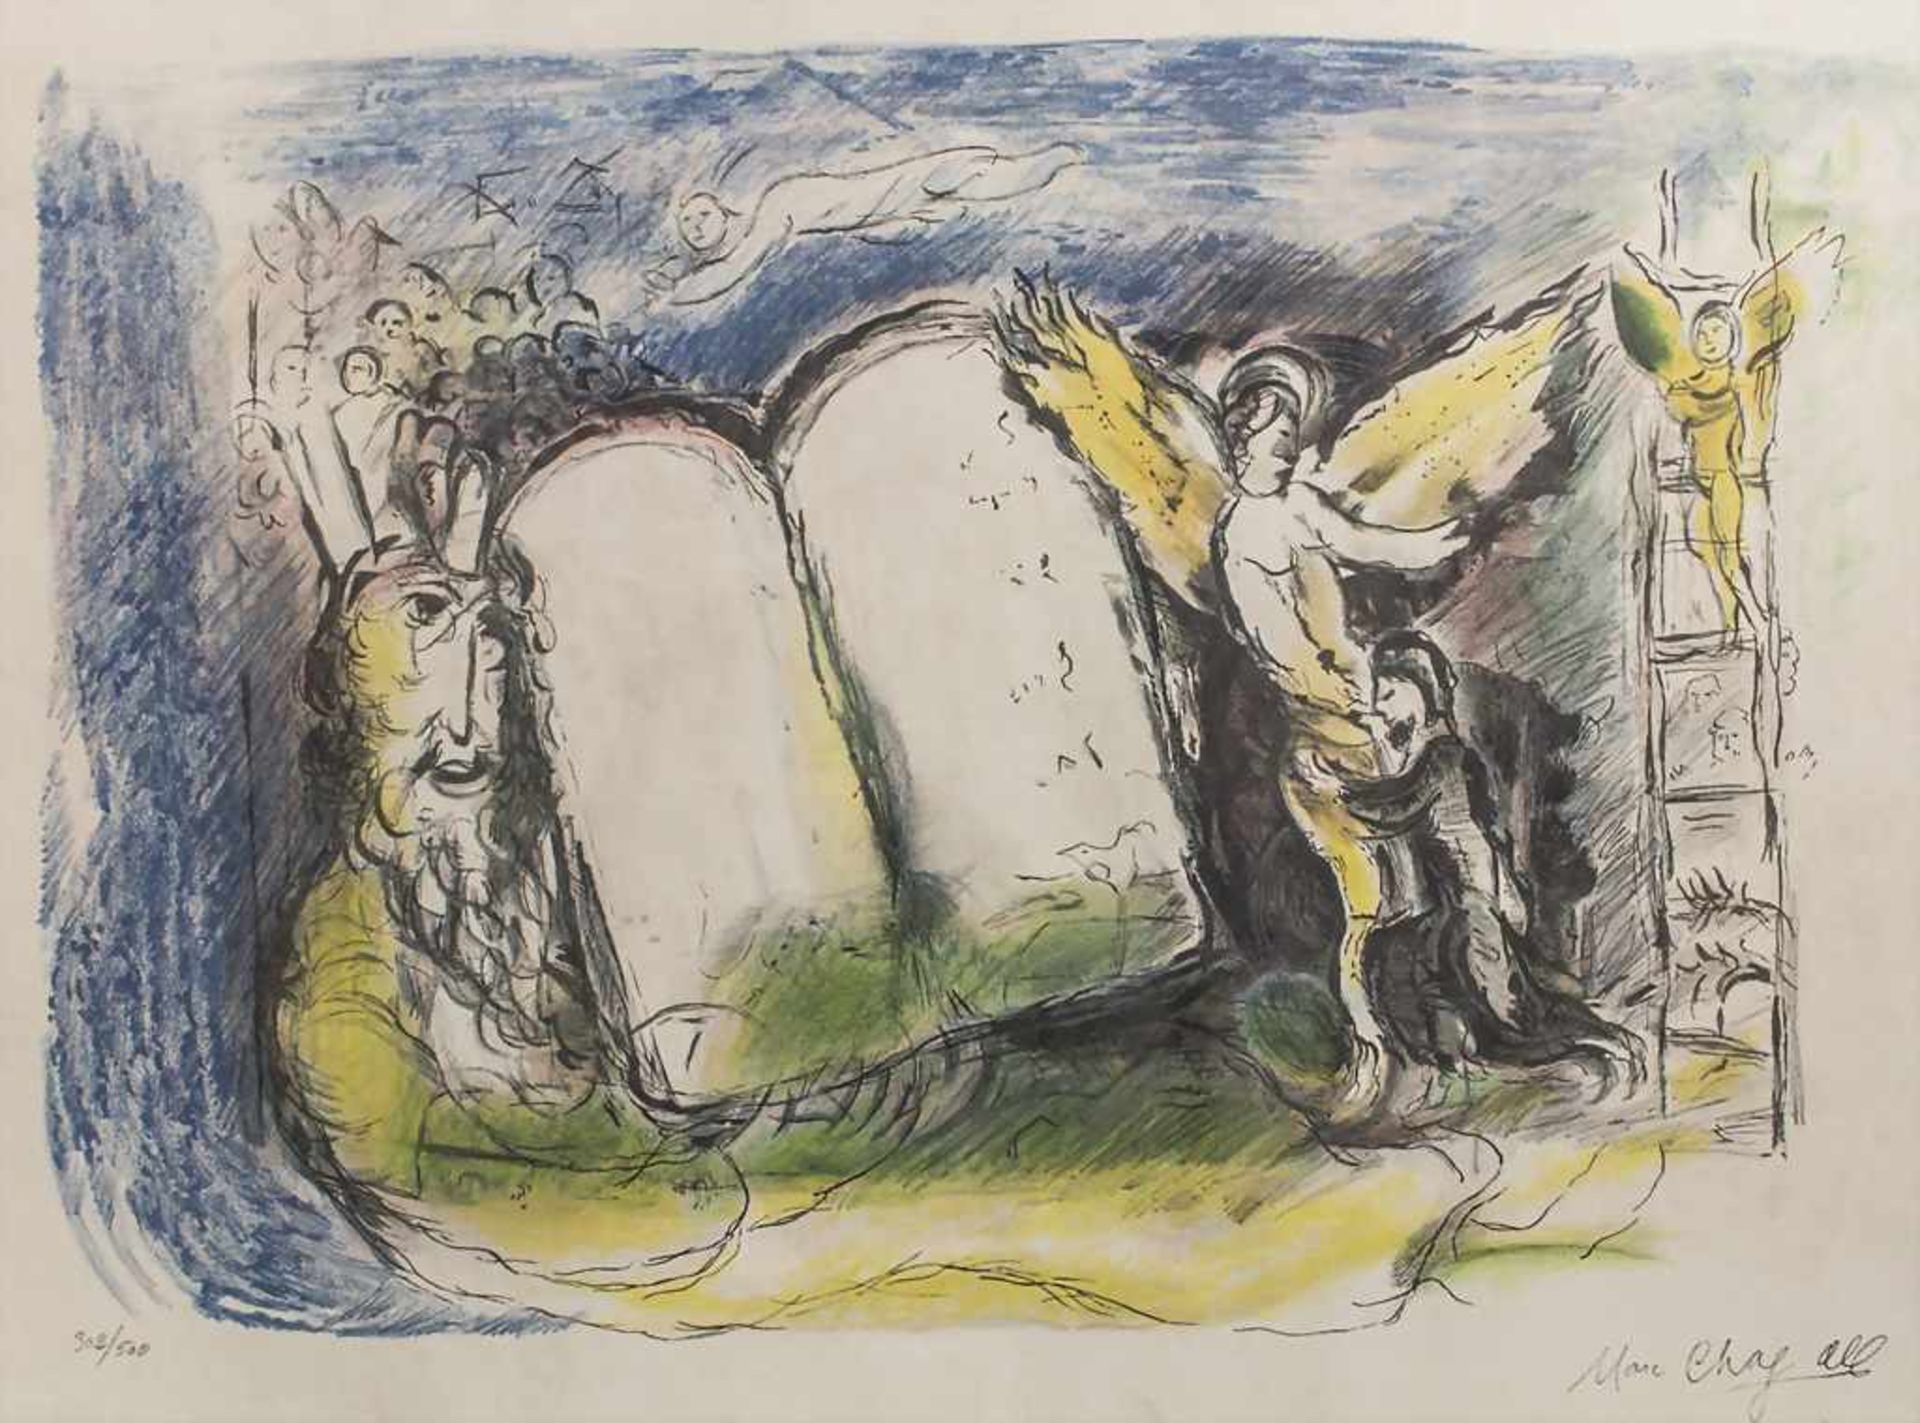 Marc Chagall (1887-1985), 'Die Vision Mose' / 'The mission of Moses'Technik: Farblitho